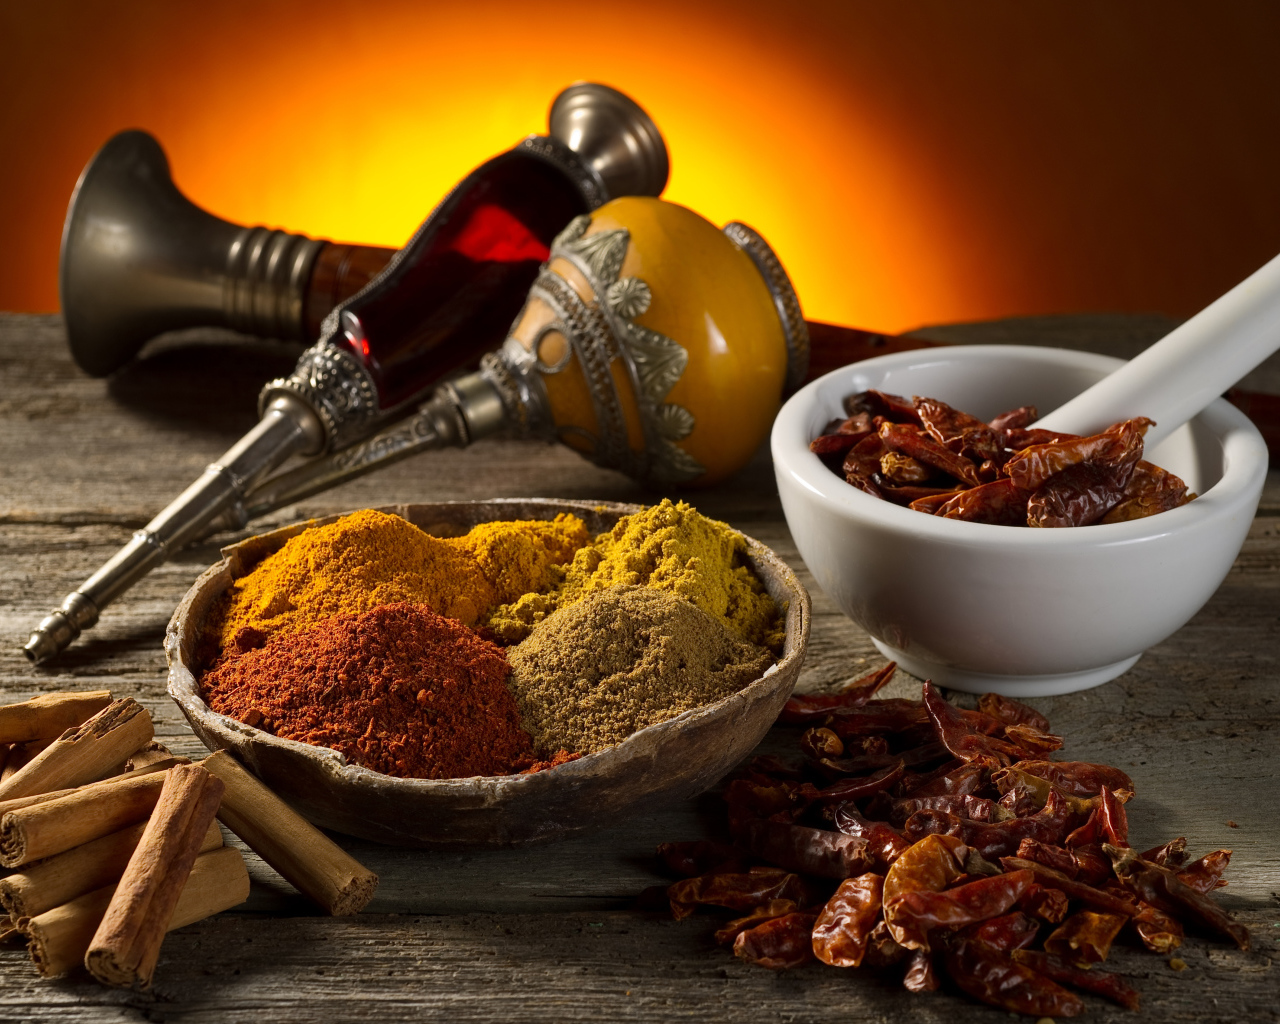 Spices and mortar for grinding